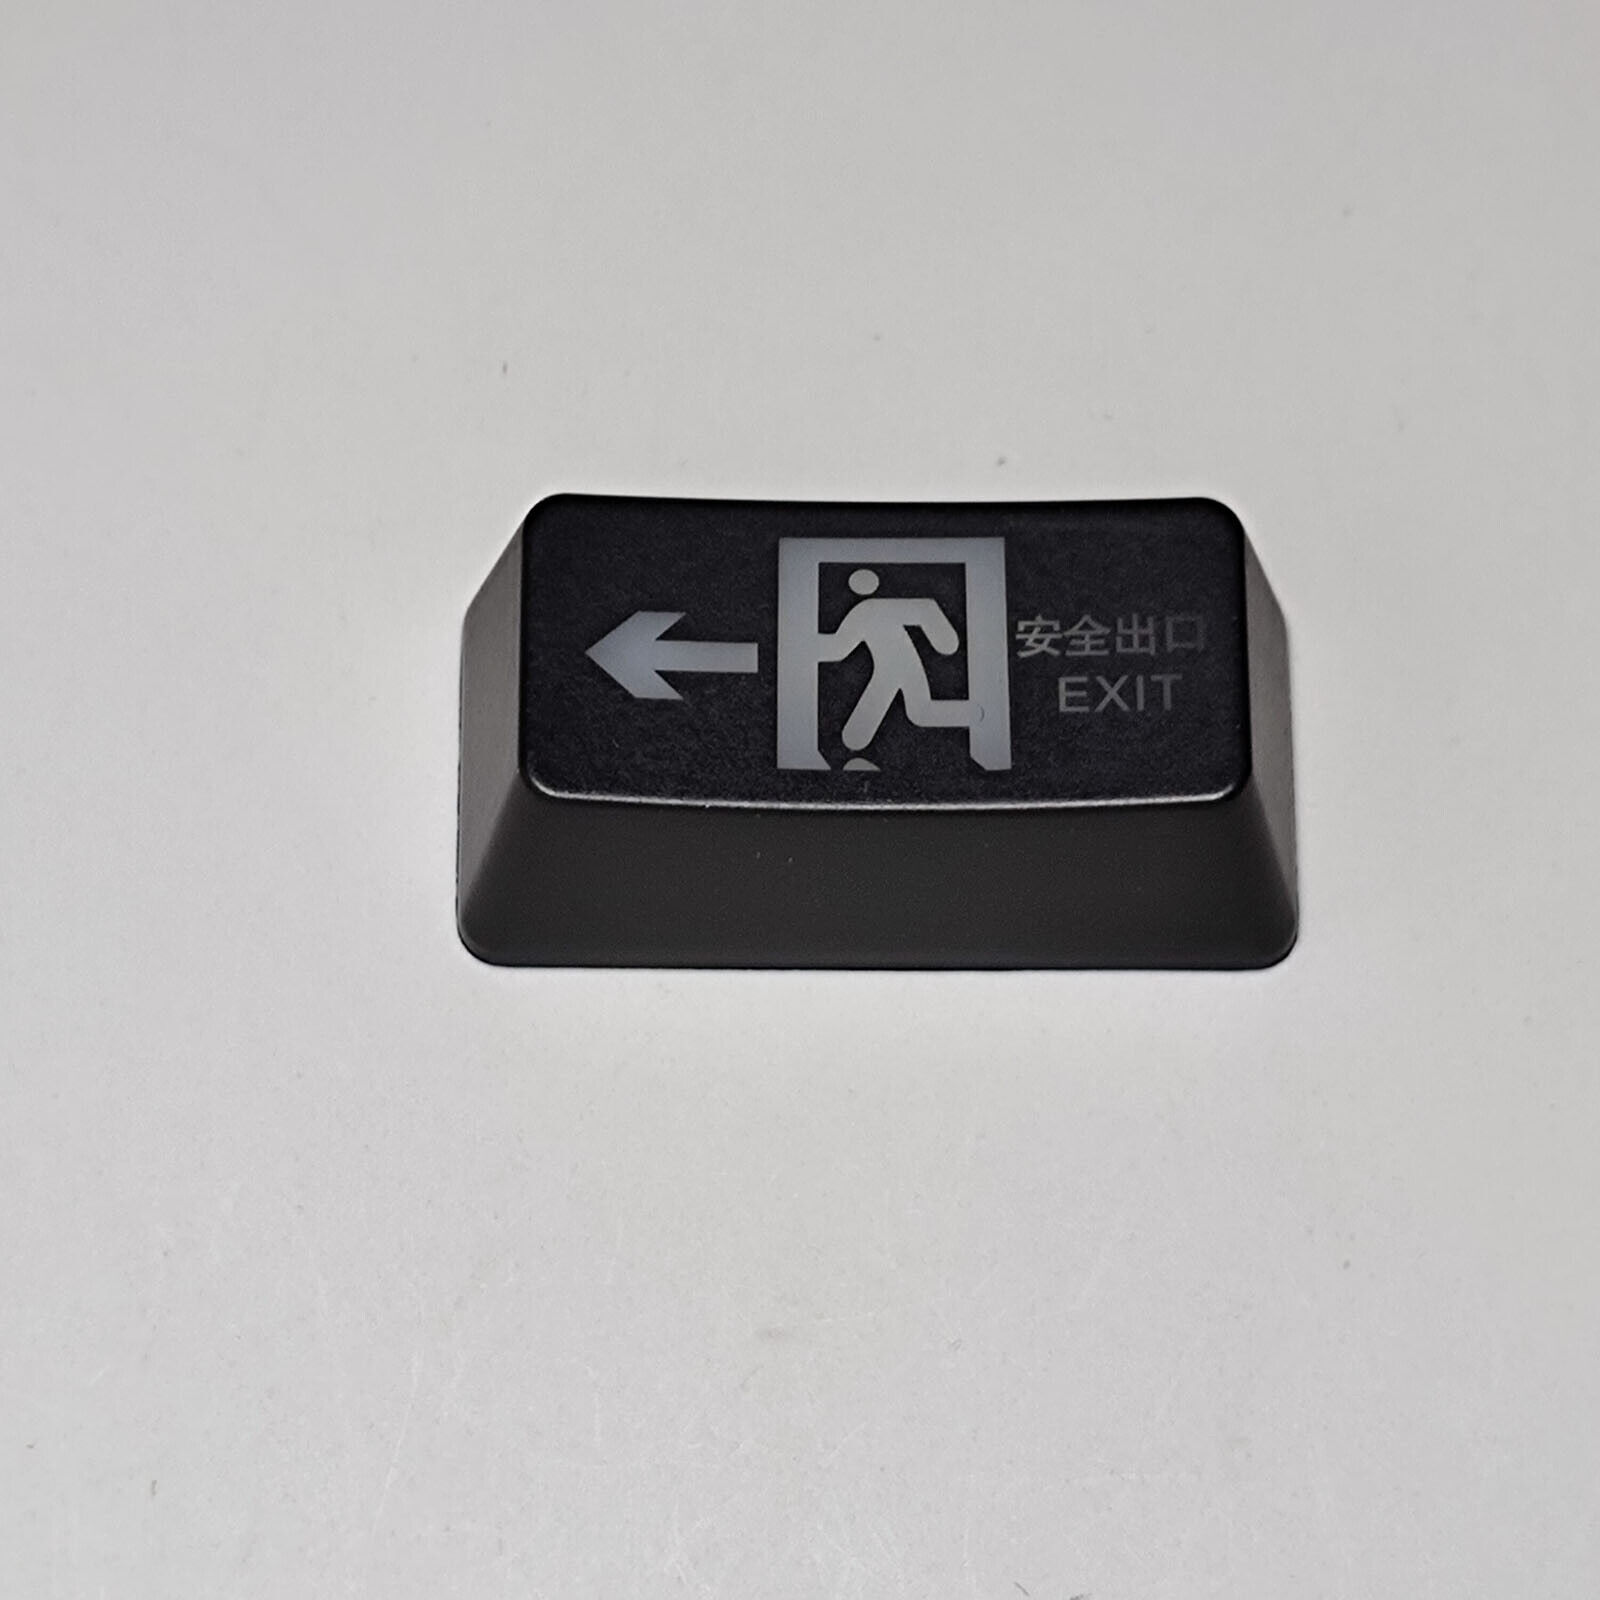 ABS Personalized Security Exit Backspace Keycap for Mechanical Keyboard Keycap